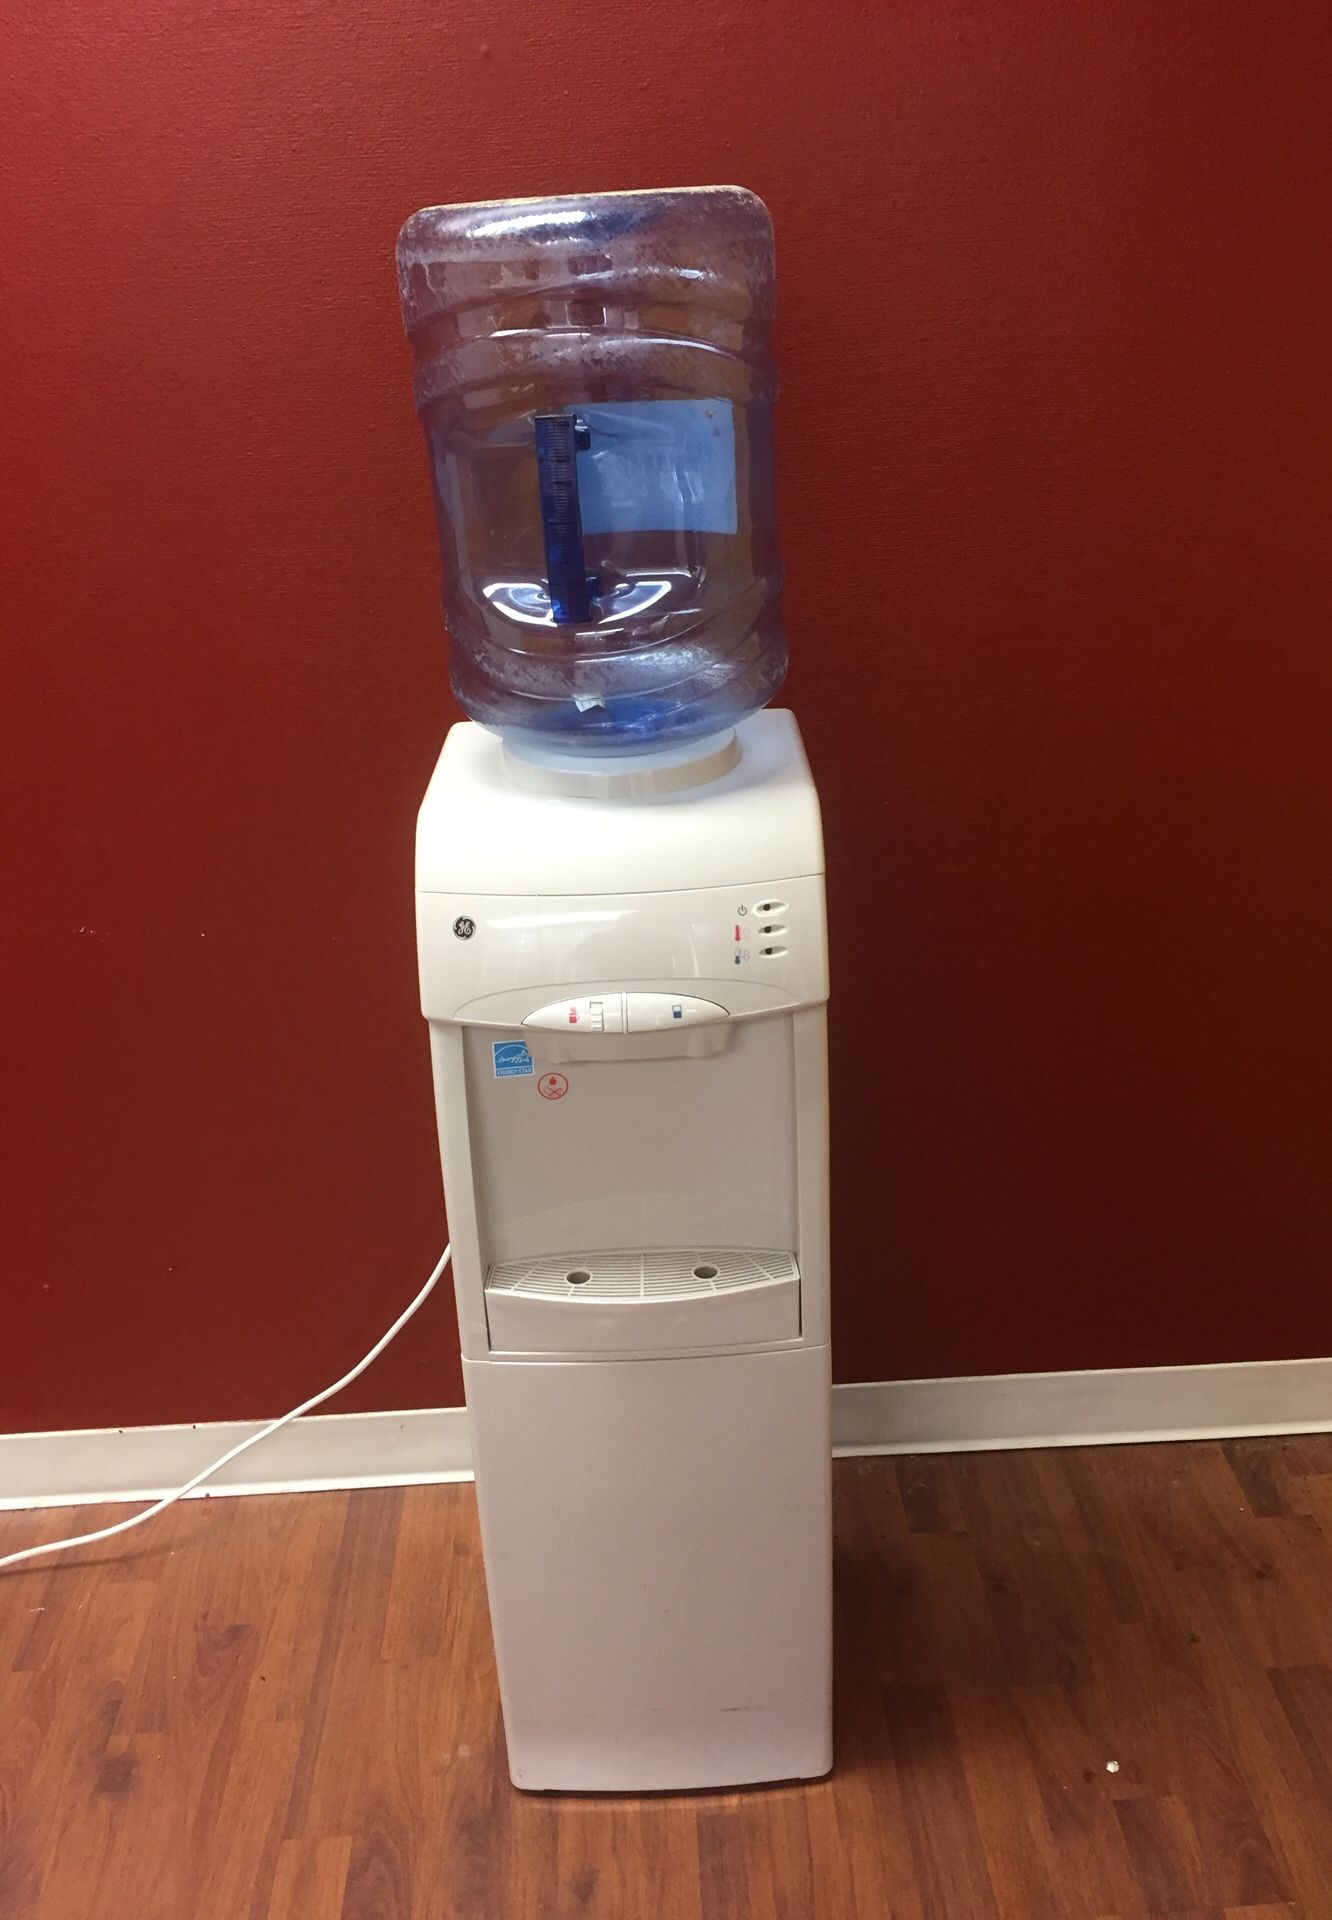 GE water cooler and heater. Like new